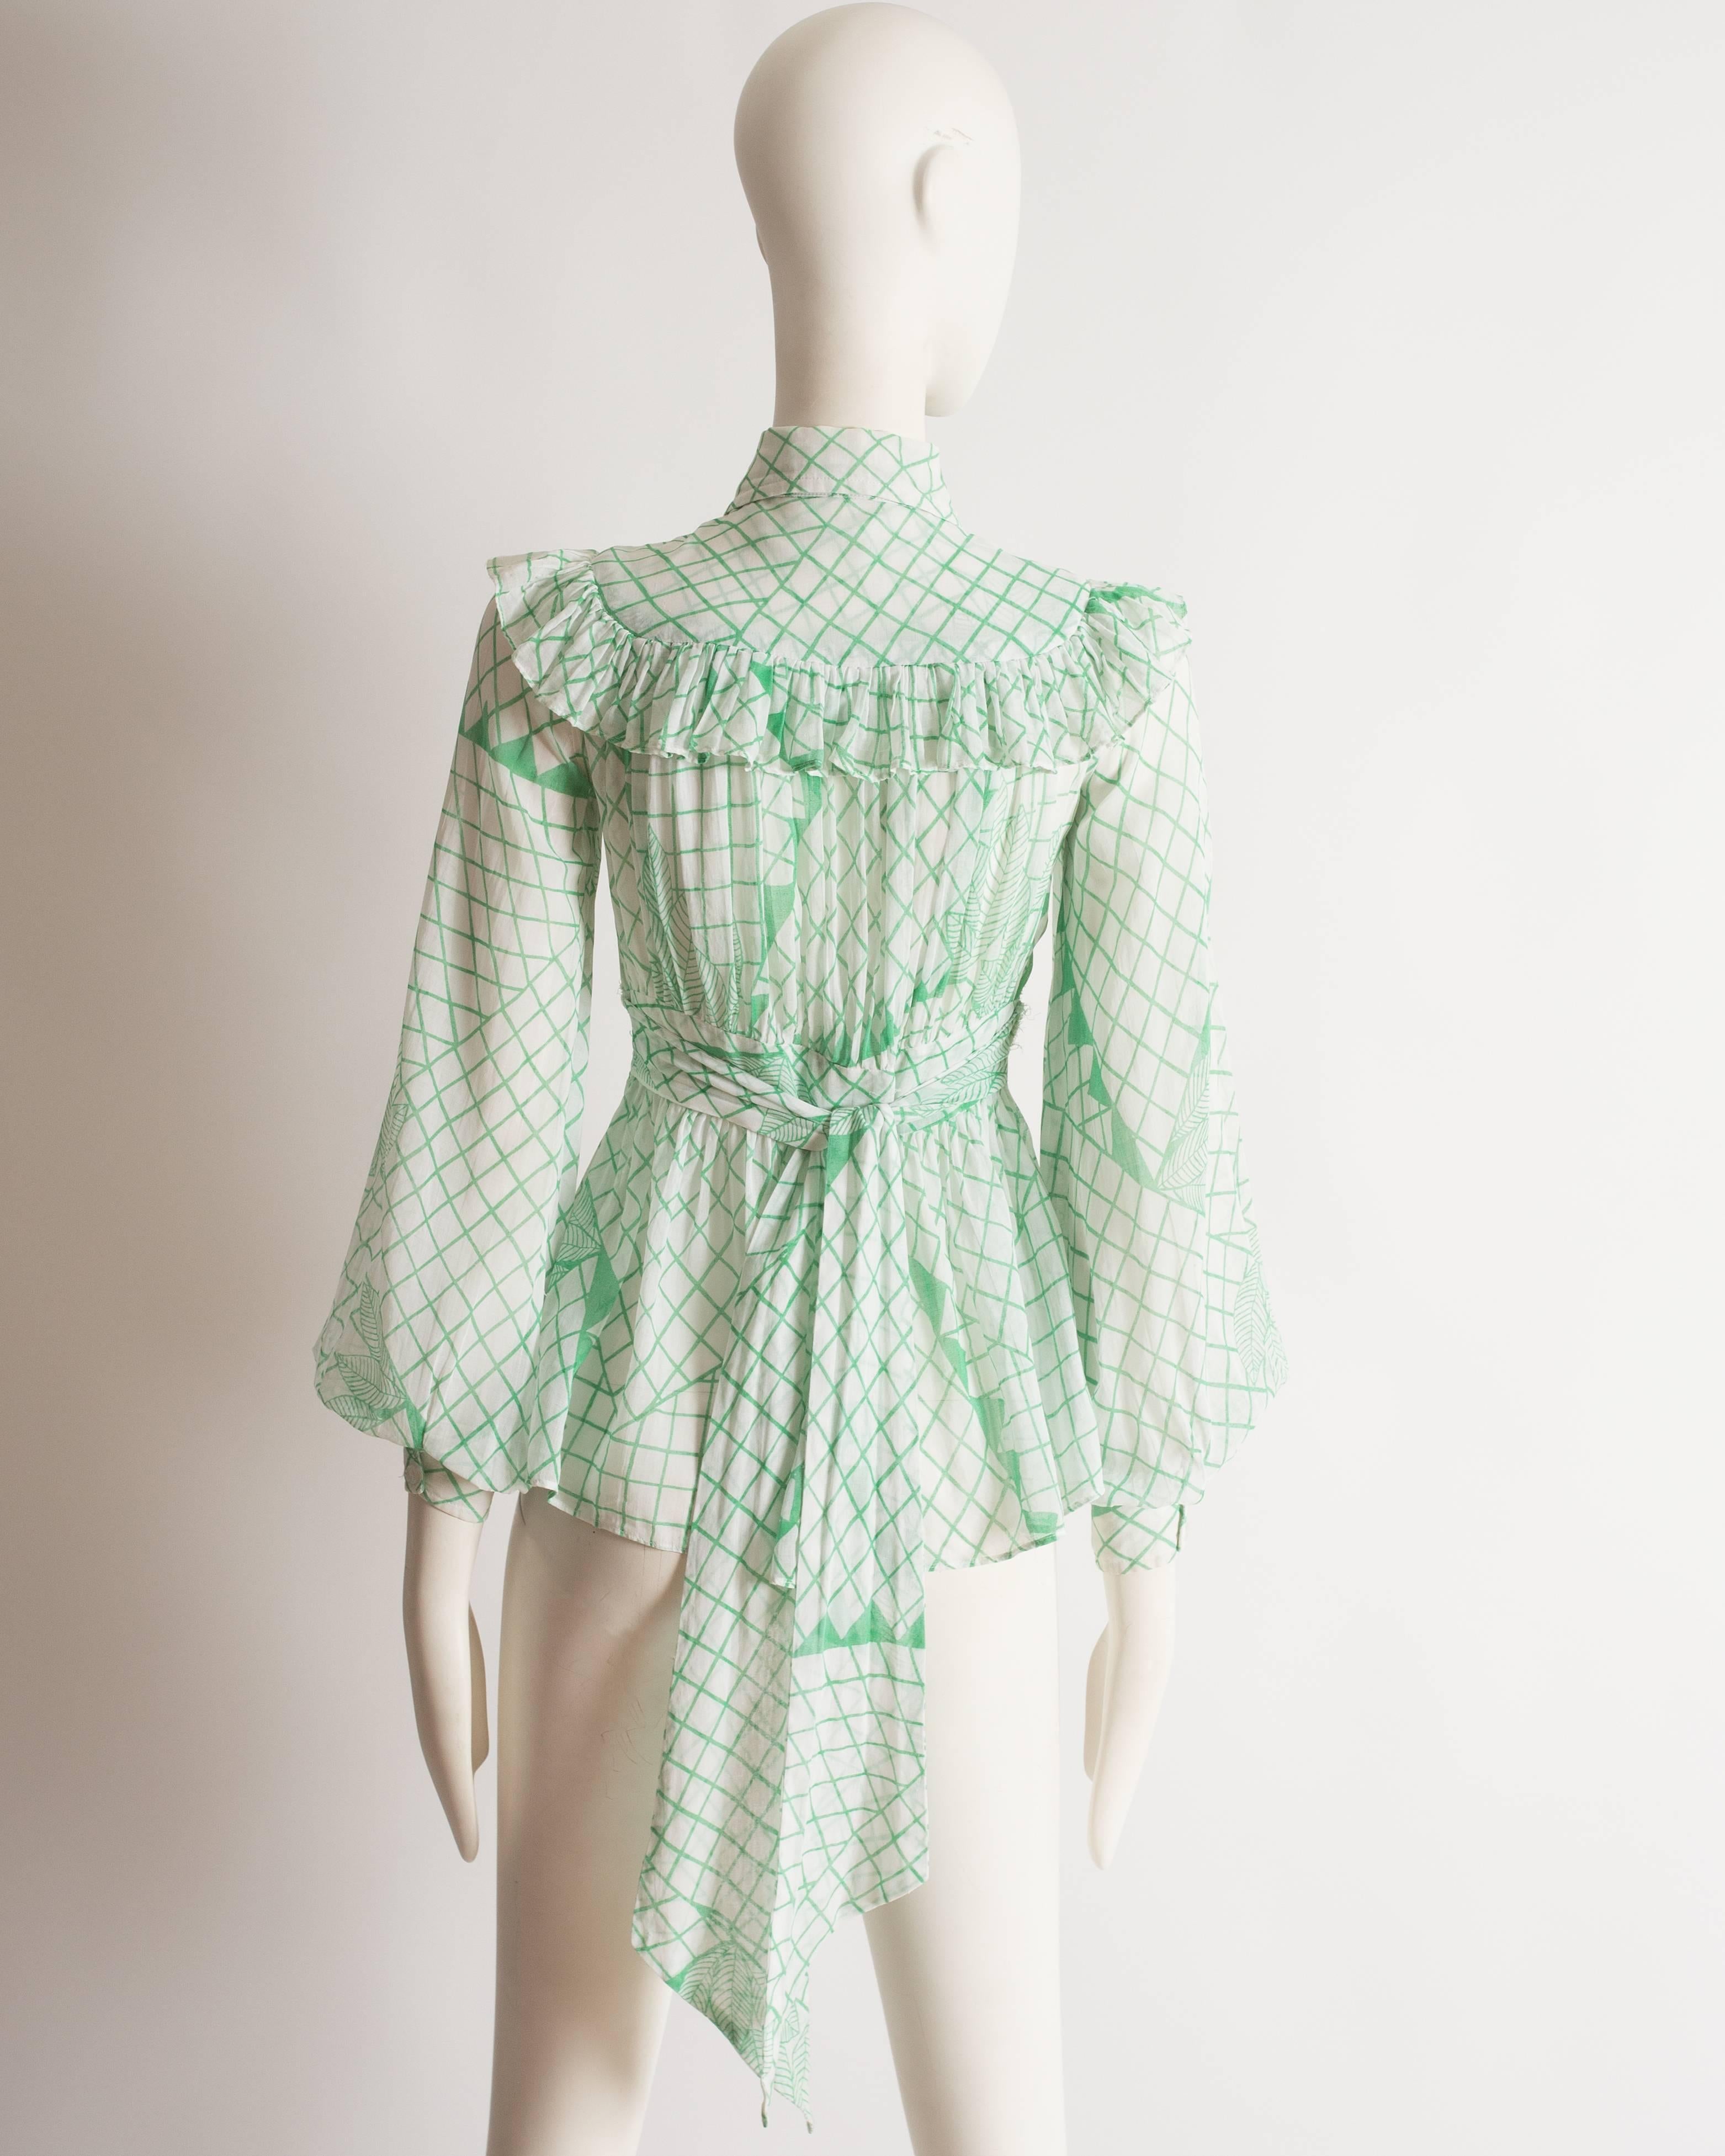 Ossie Clark voile blouse with Celia Birtwell print, circa 1972 1